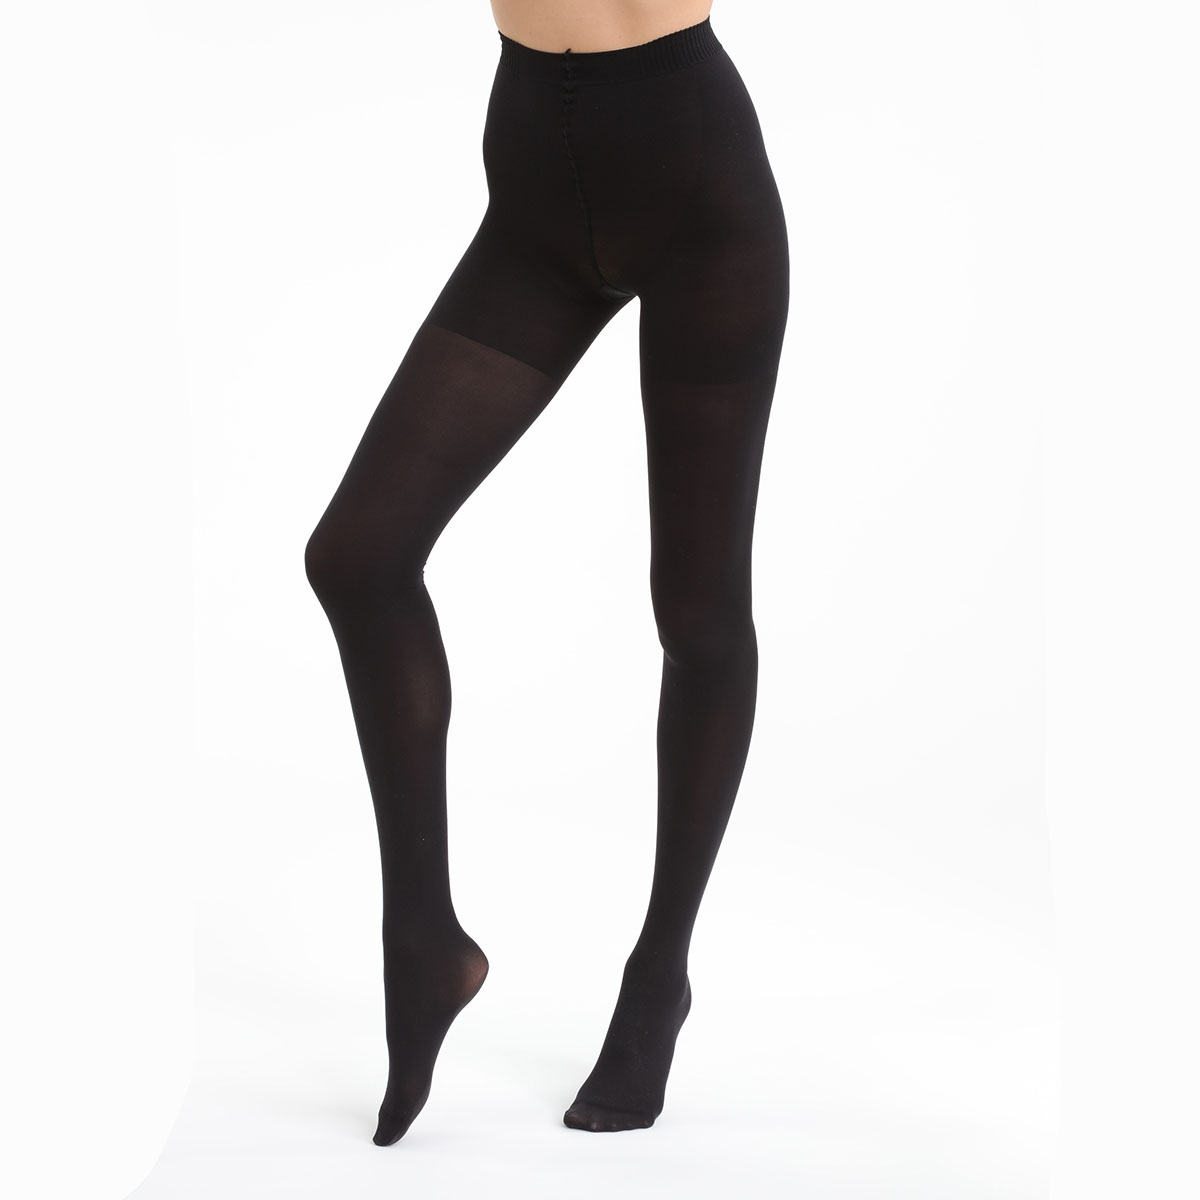 Black Madame So Daily Ultra-Opaque 80 blackout tights